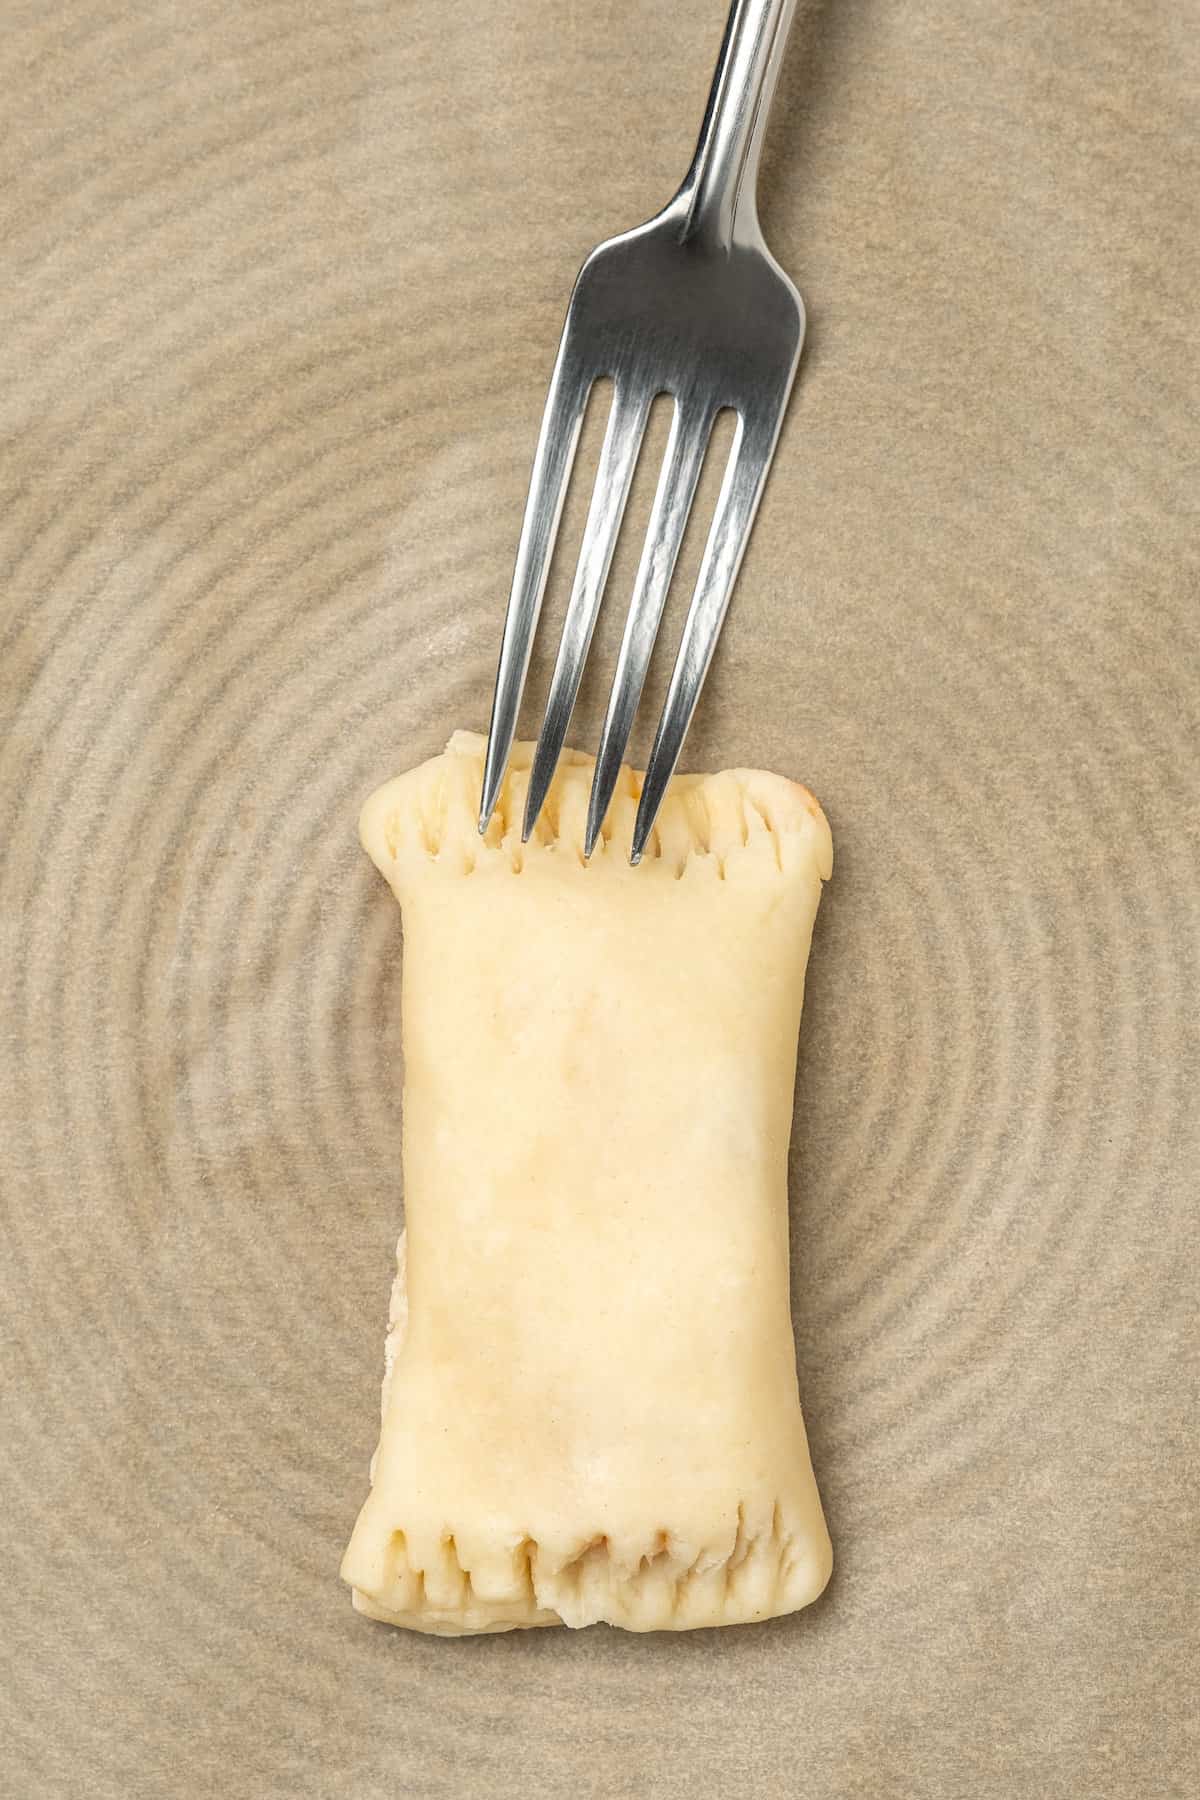 A fork is used to crimp the dough edges of a folded pizza roll.